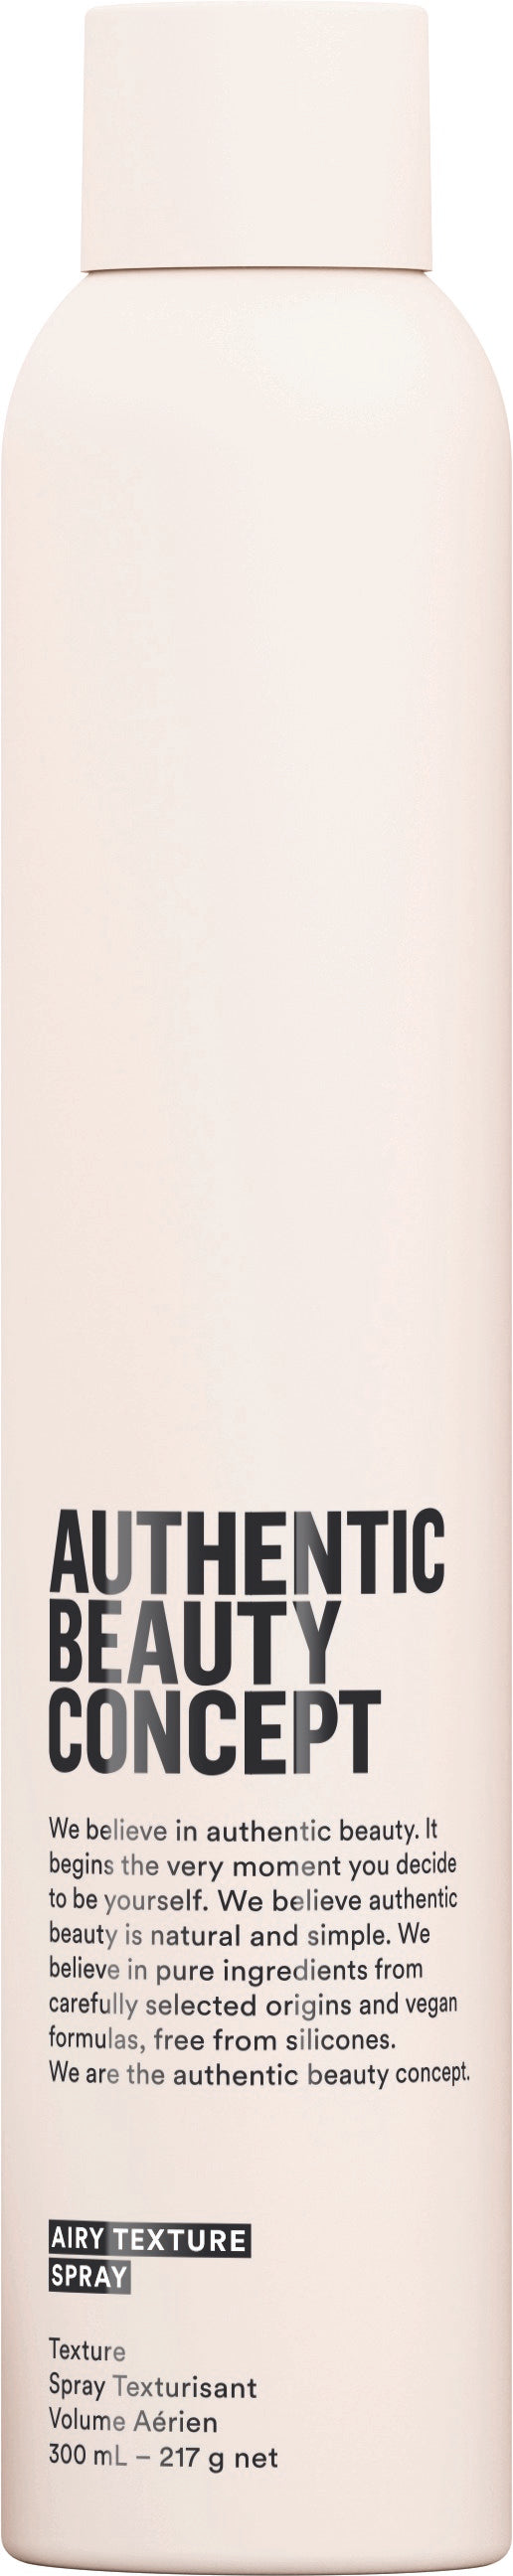 Authentic Beauty Concept - Airy Texture Spray 300g